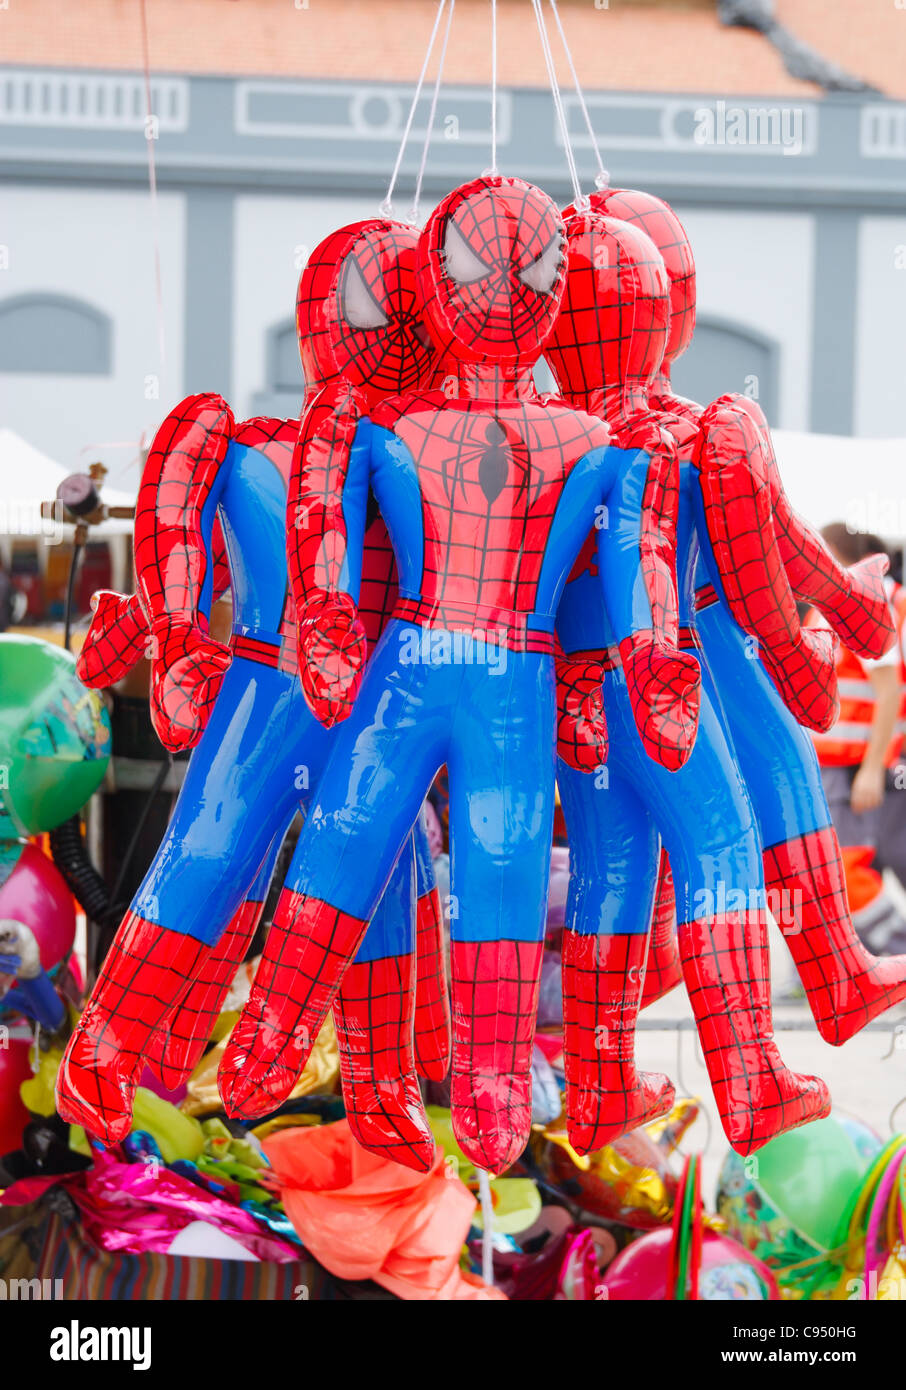 Inflatable Spiderman dolls on market stall in Spain Stock Photo - Alamy